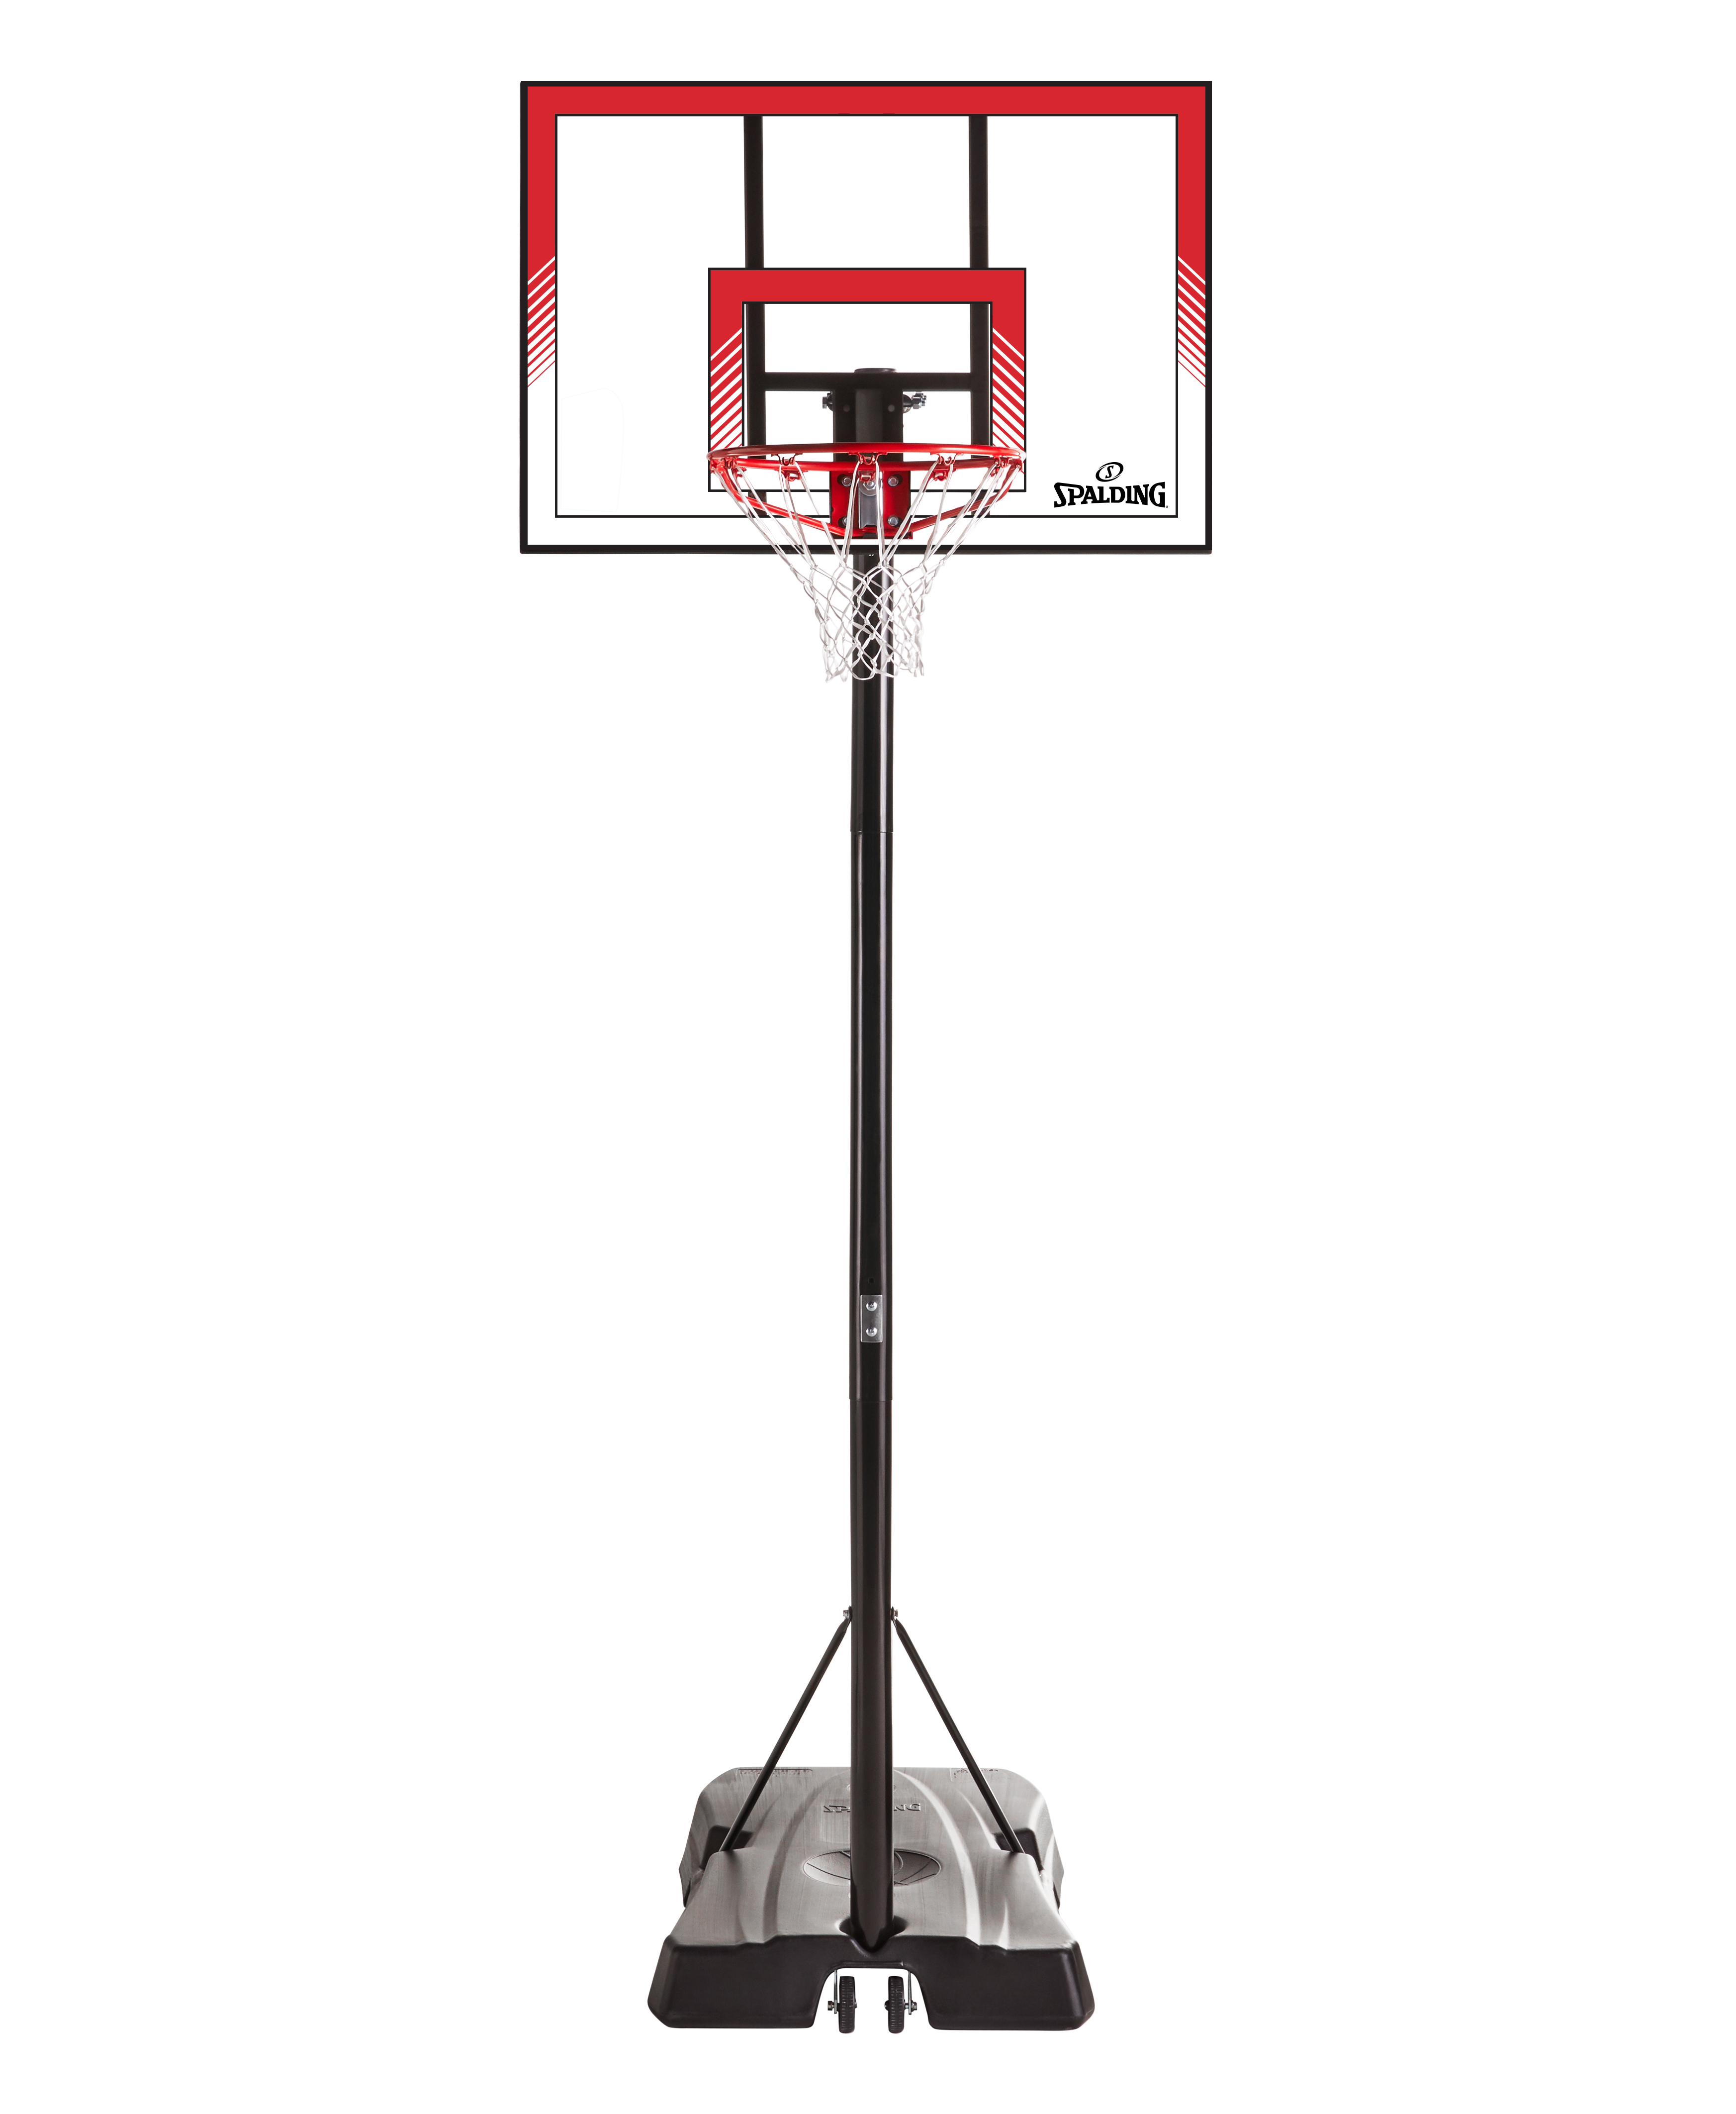 Spalding Ratchet Lift 44 In. Polycarbonate Portable Basketball Hoop System - image 2 of 6